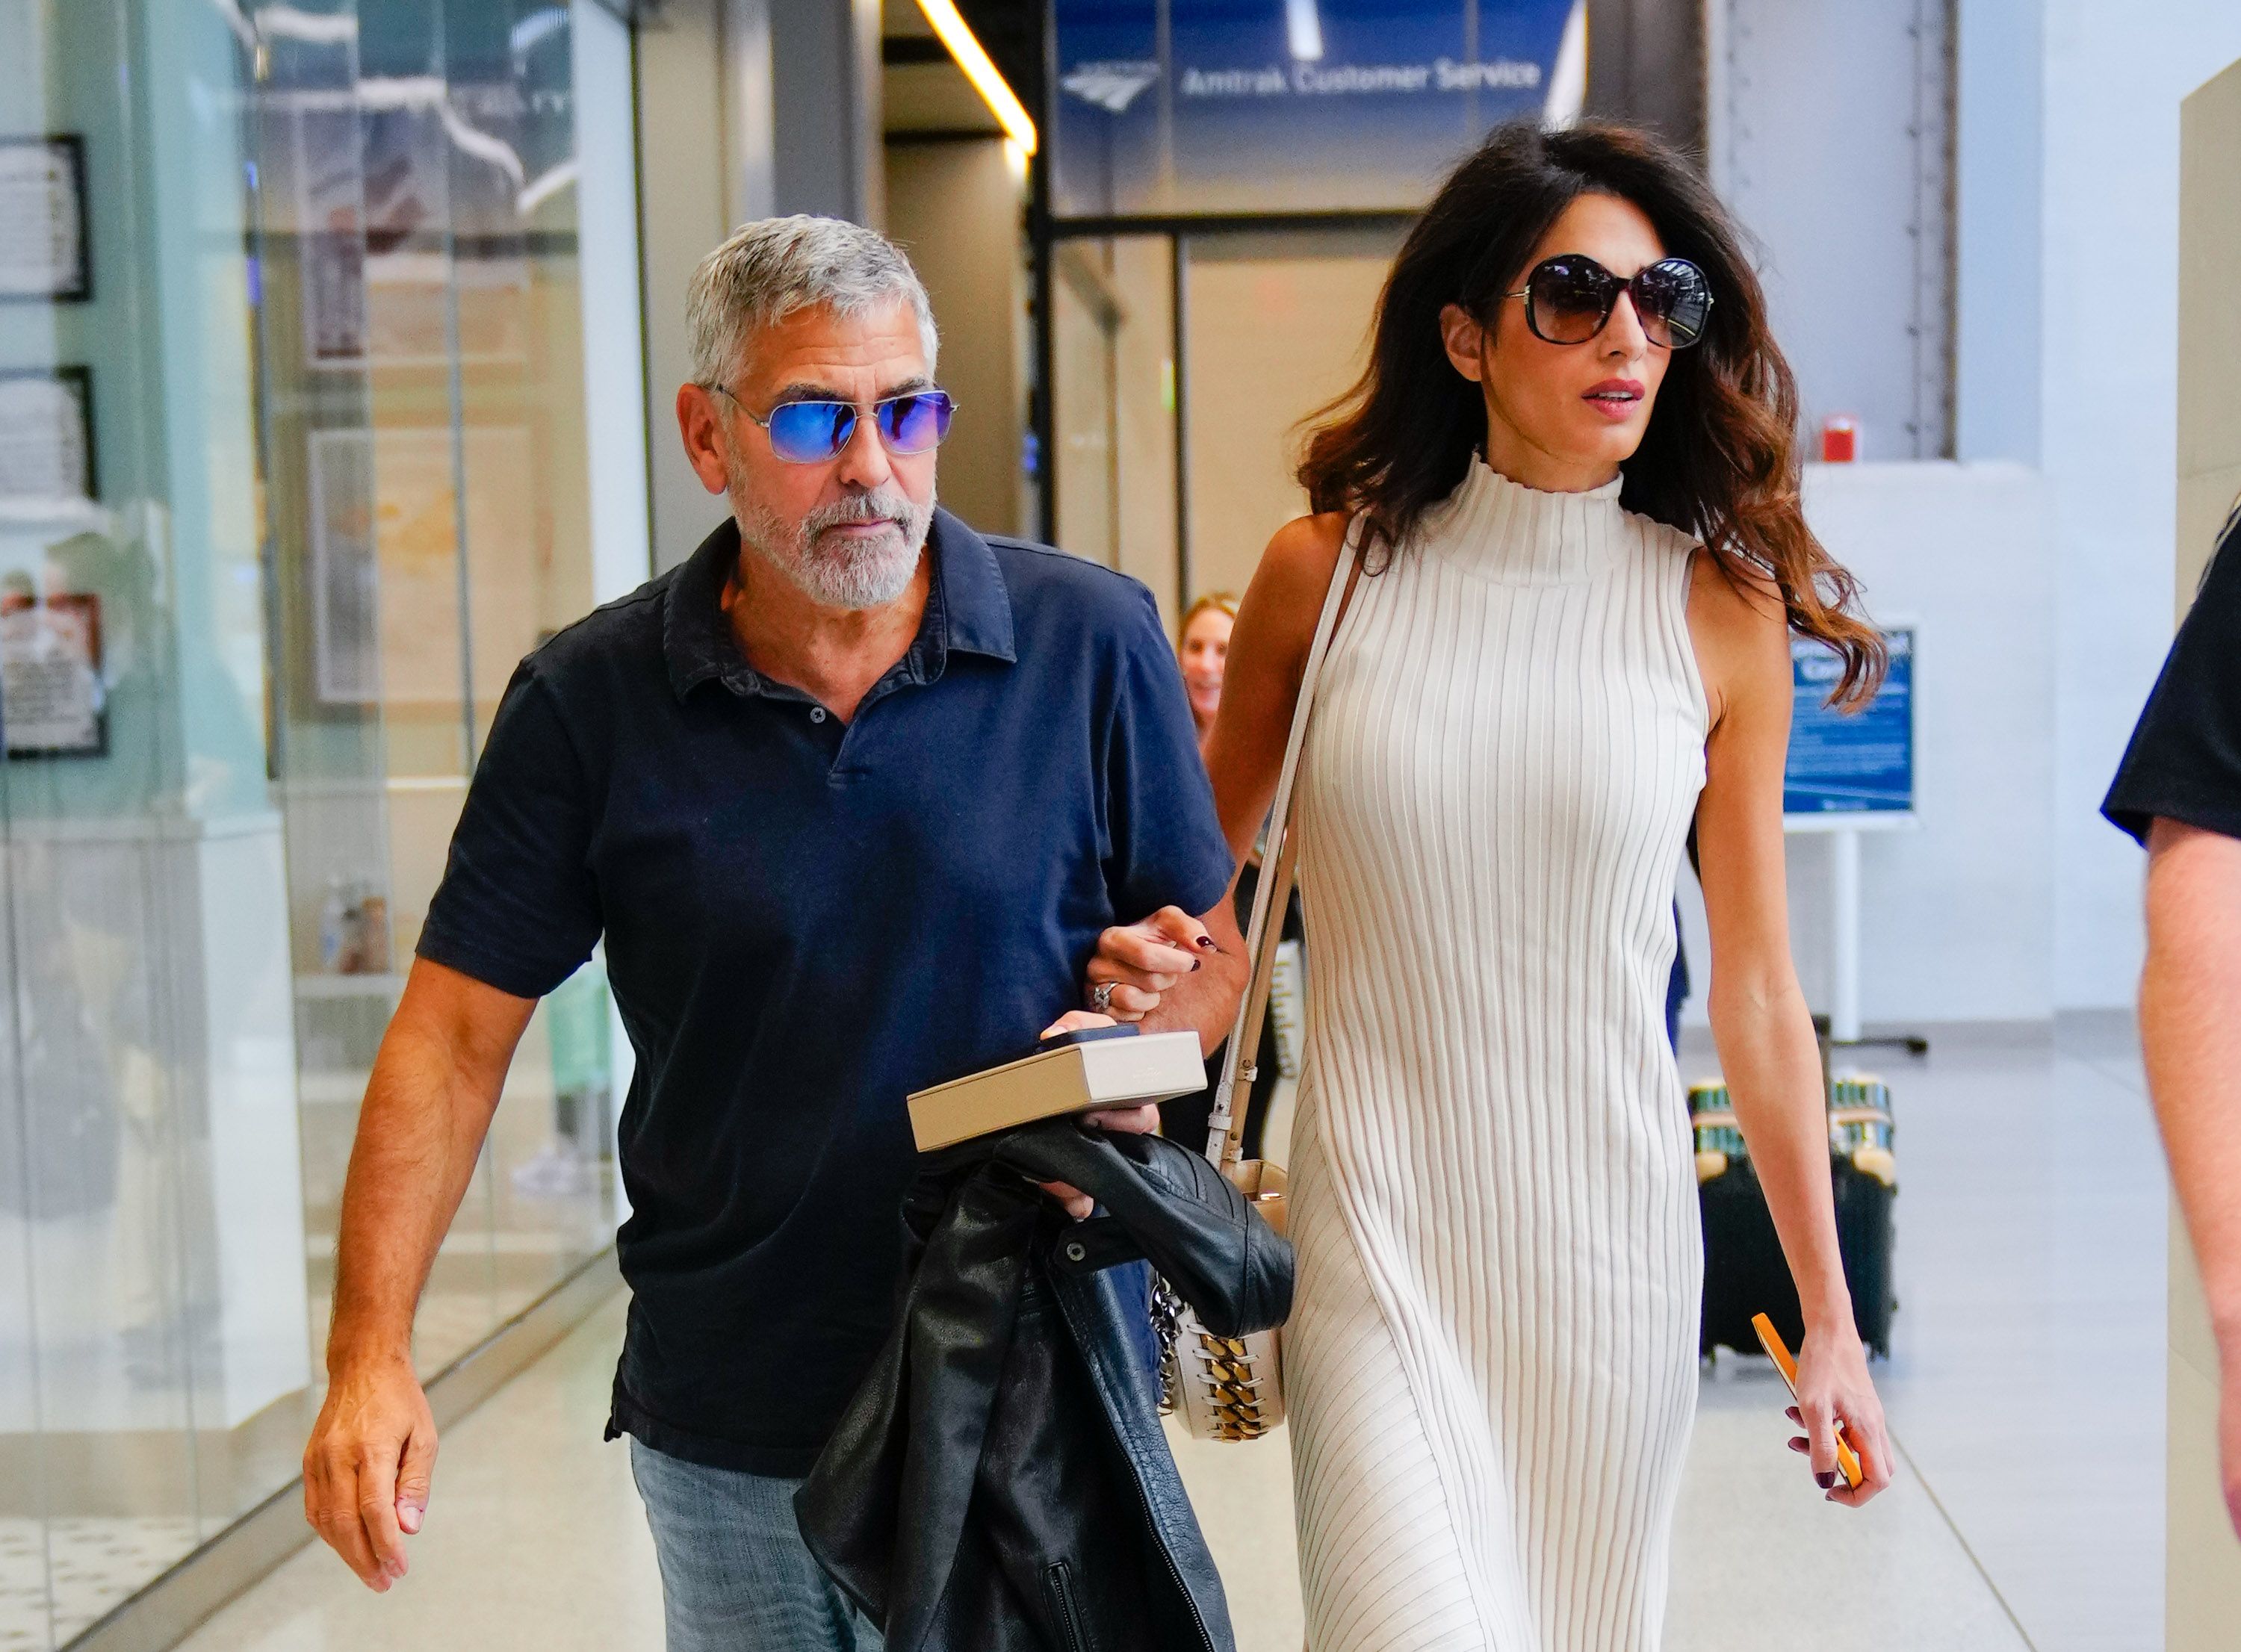 Let Amal Clooney's Favourite Handbags Inspire Your Christmas Wishlist